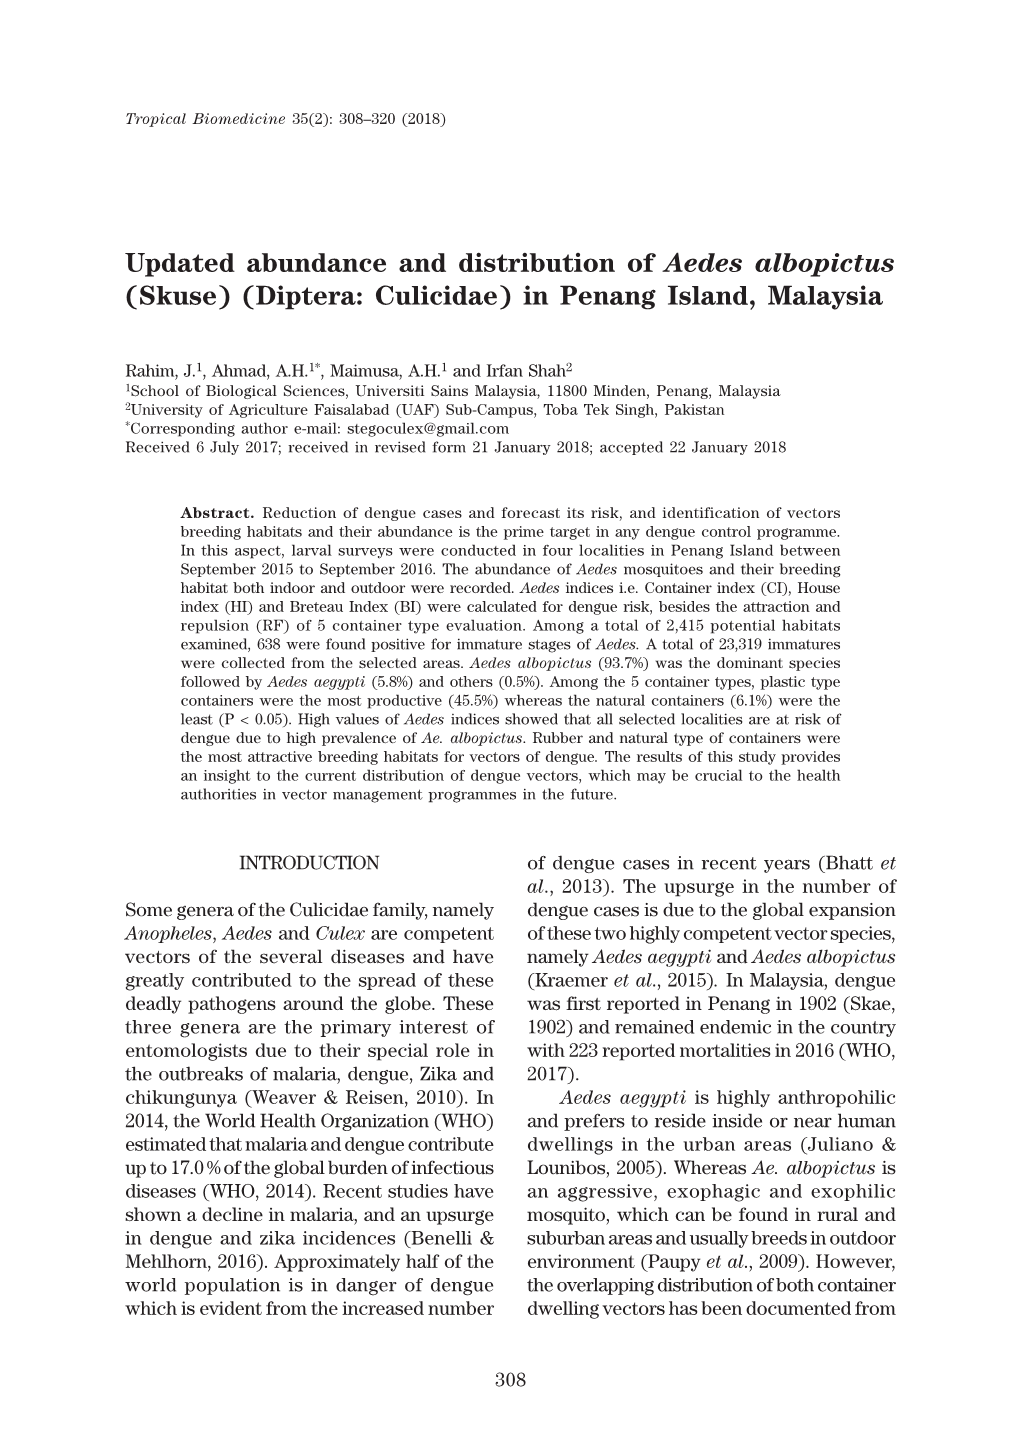 308-320 : Updated Abundance and Distribution of Aedes Albopictus